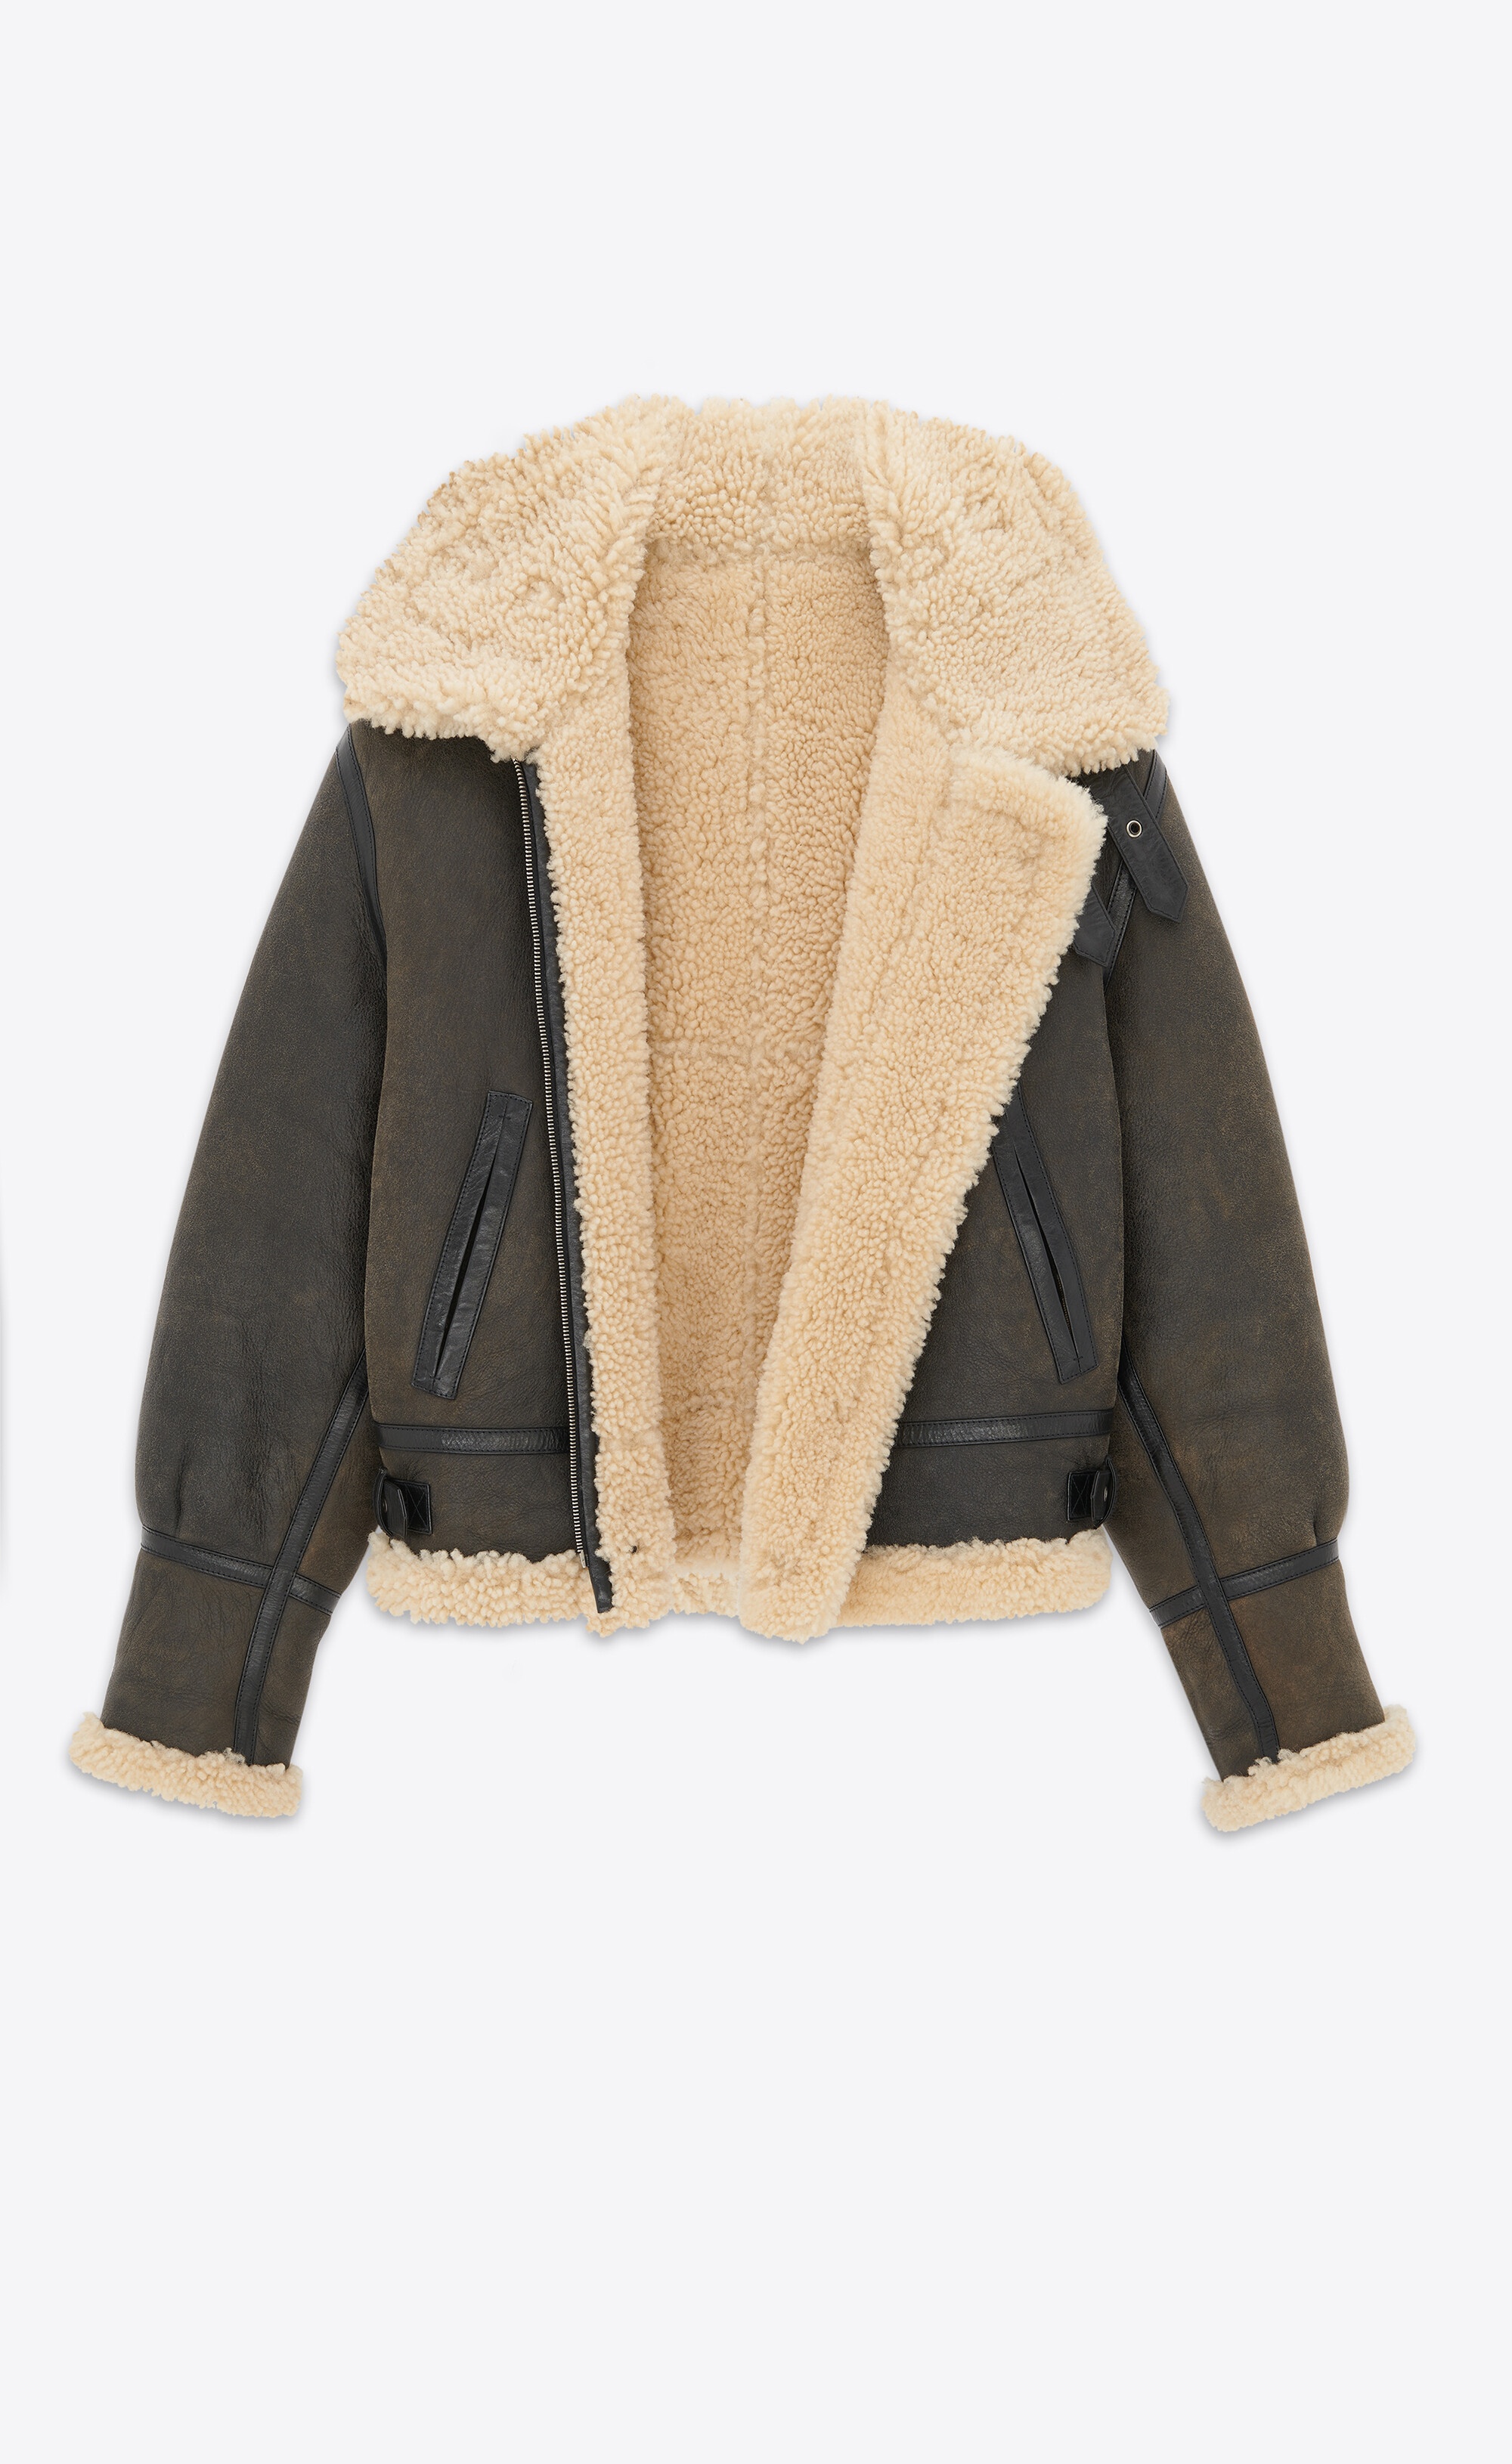 SAINT LAURENT reversible aviator jacket in aged leather and 